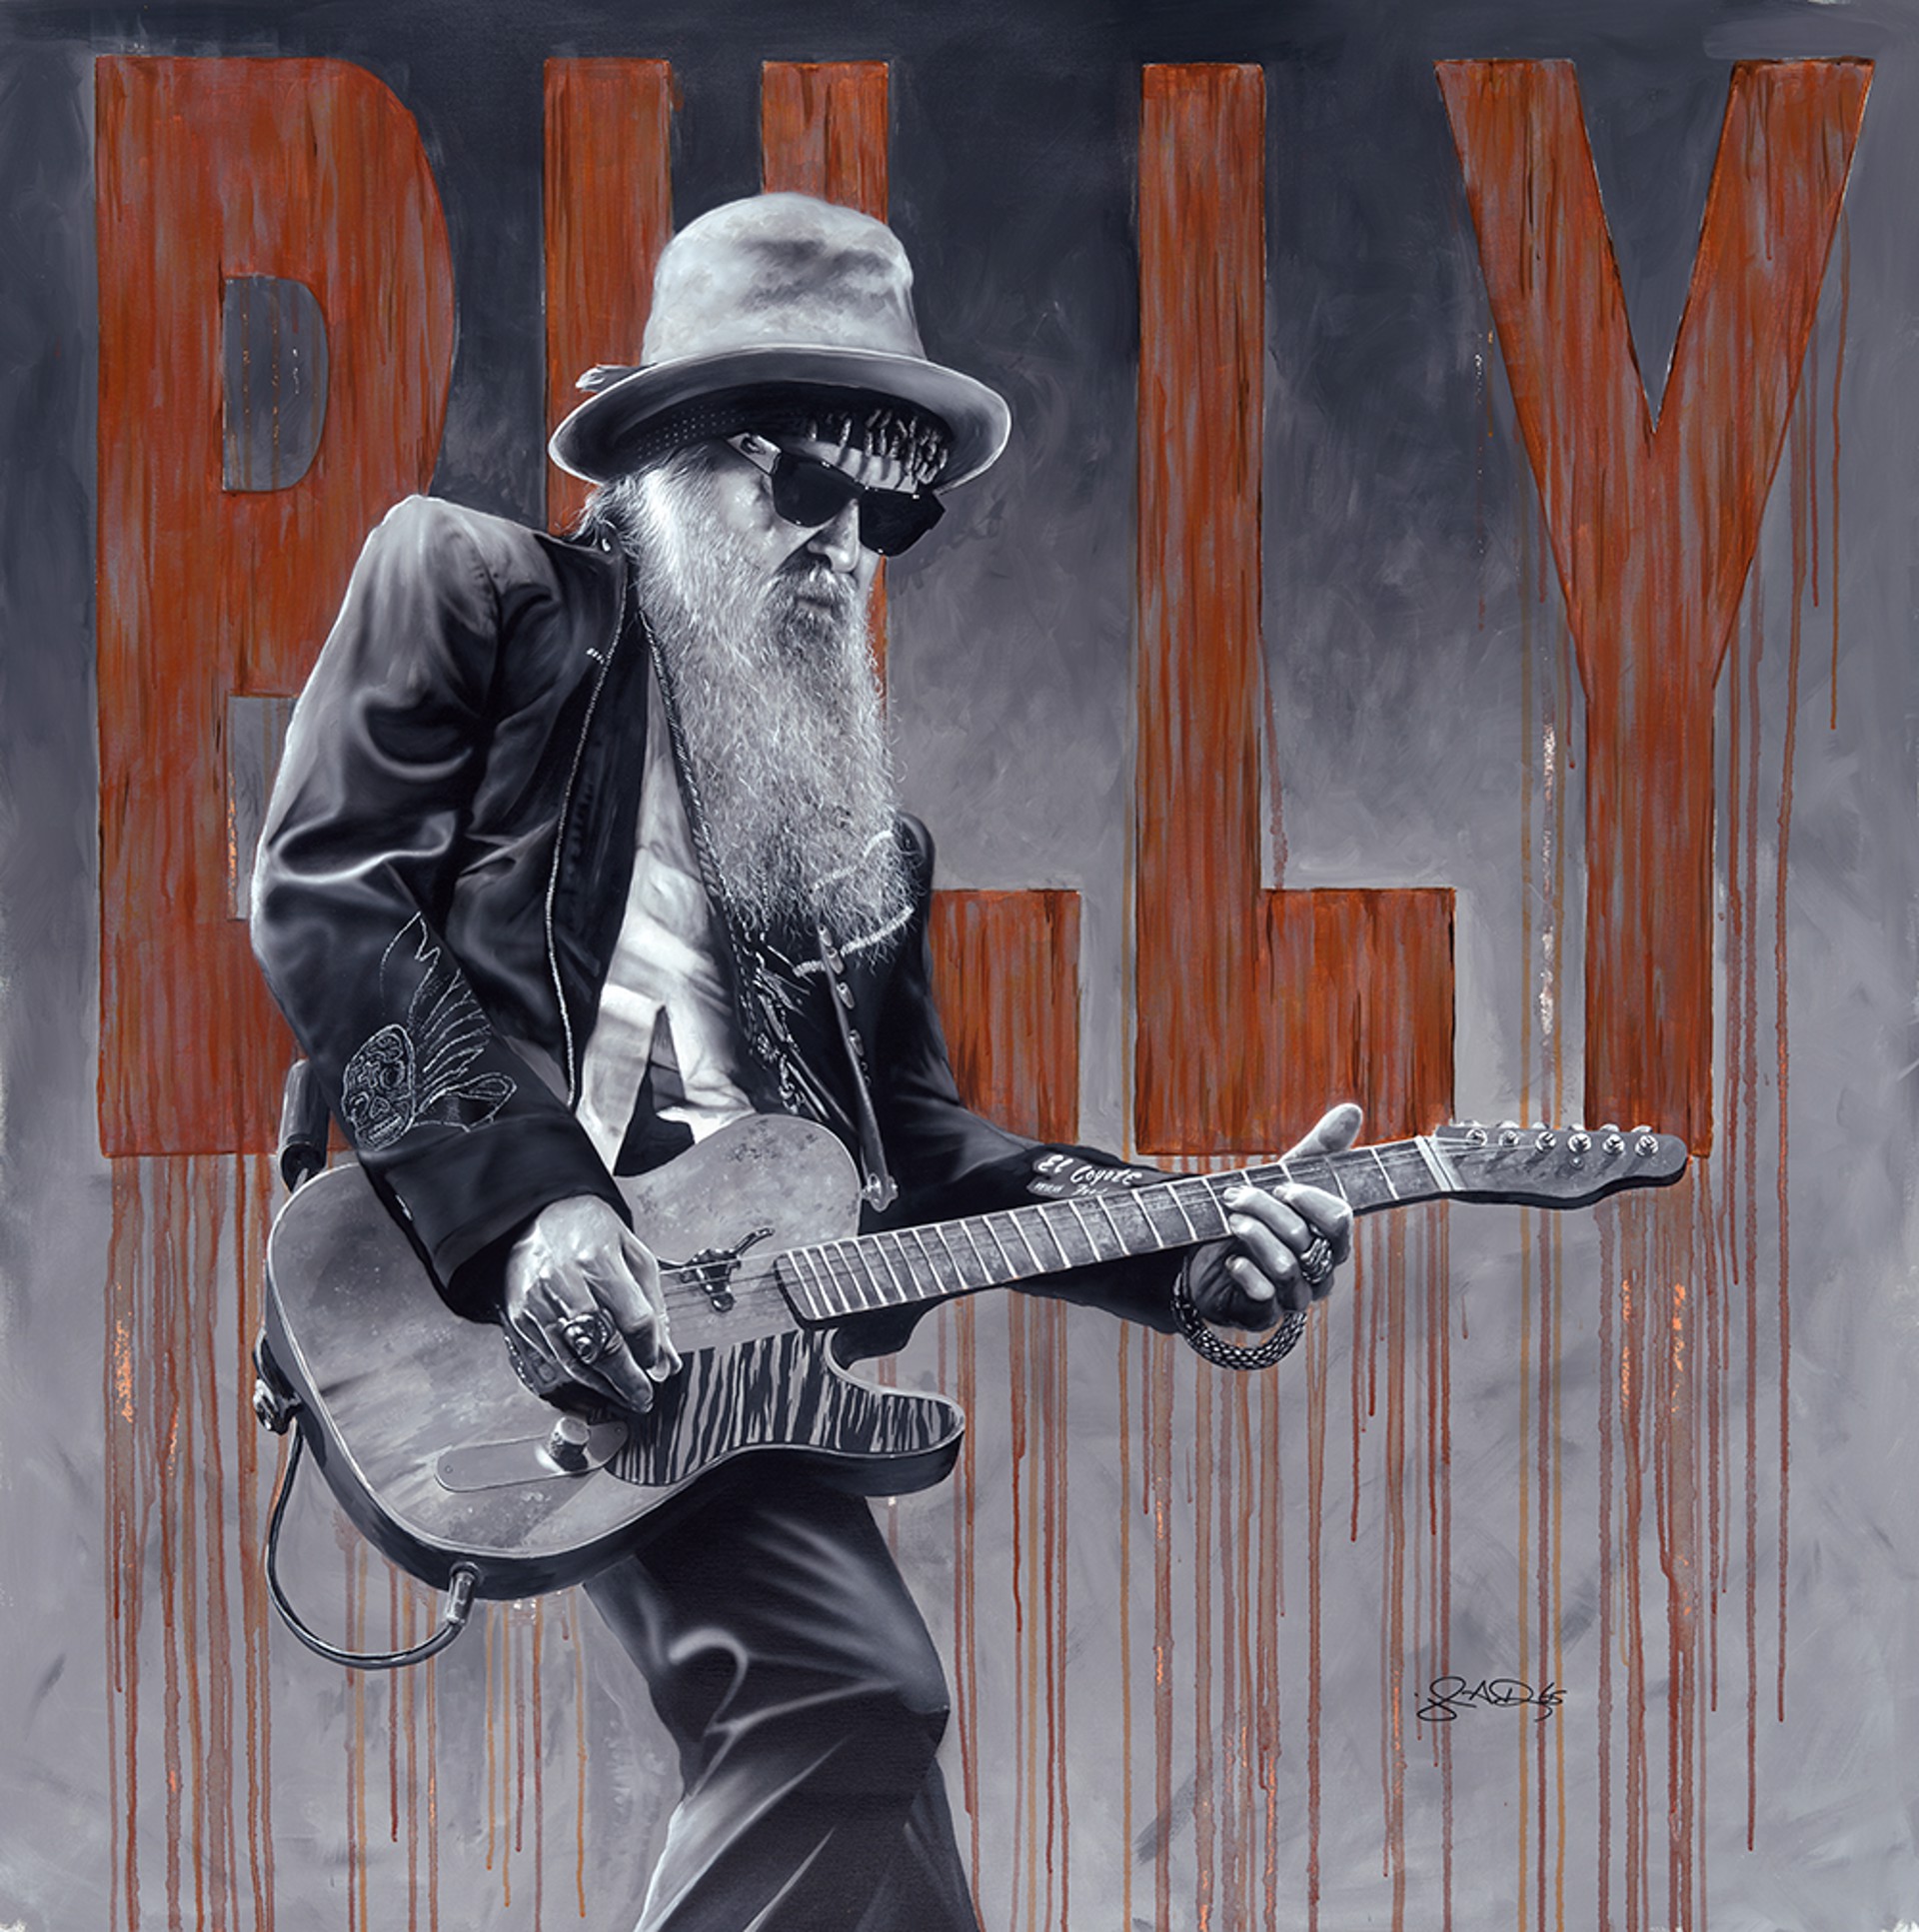 "For the Love of El Coyote" Billy Gibbons by John Douglas